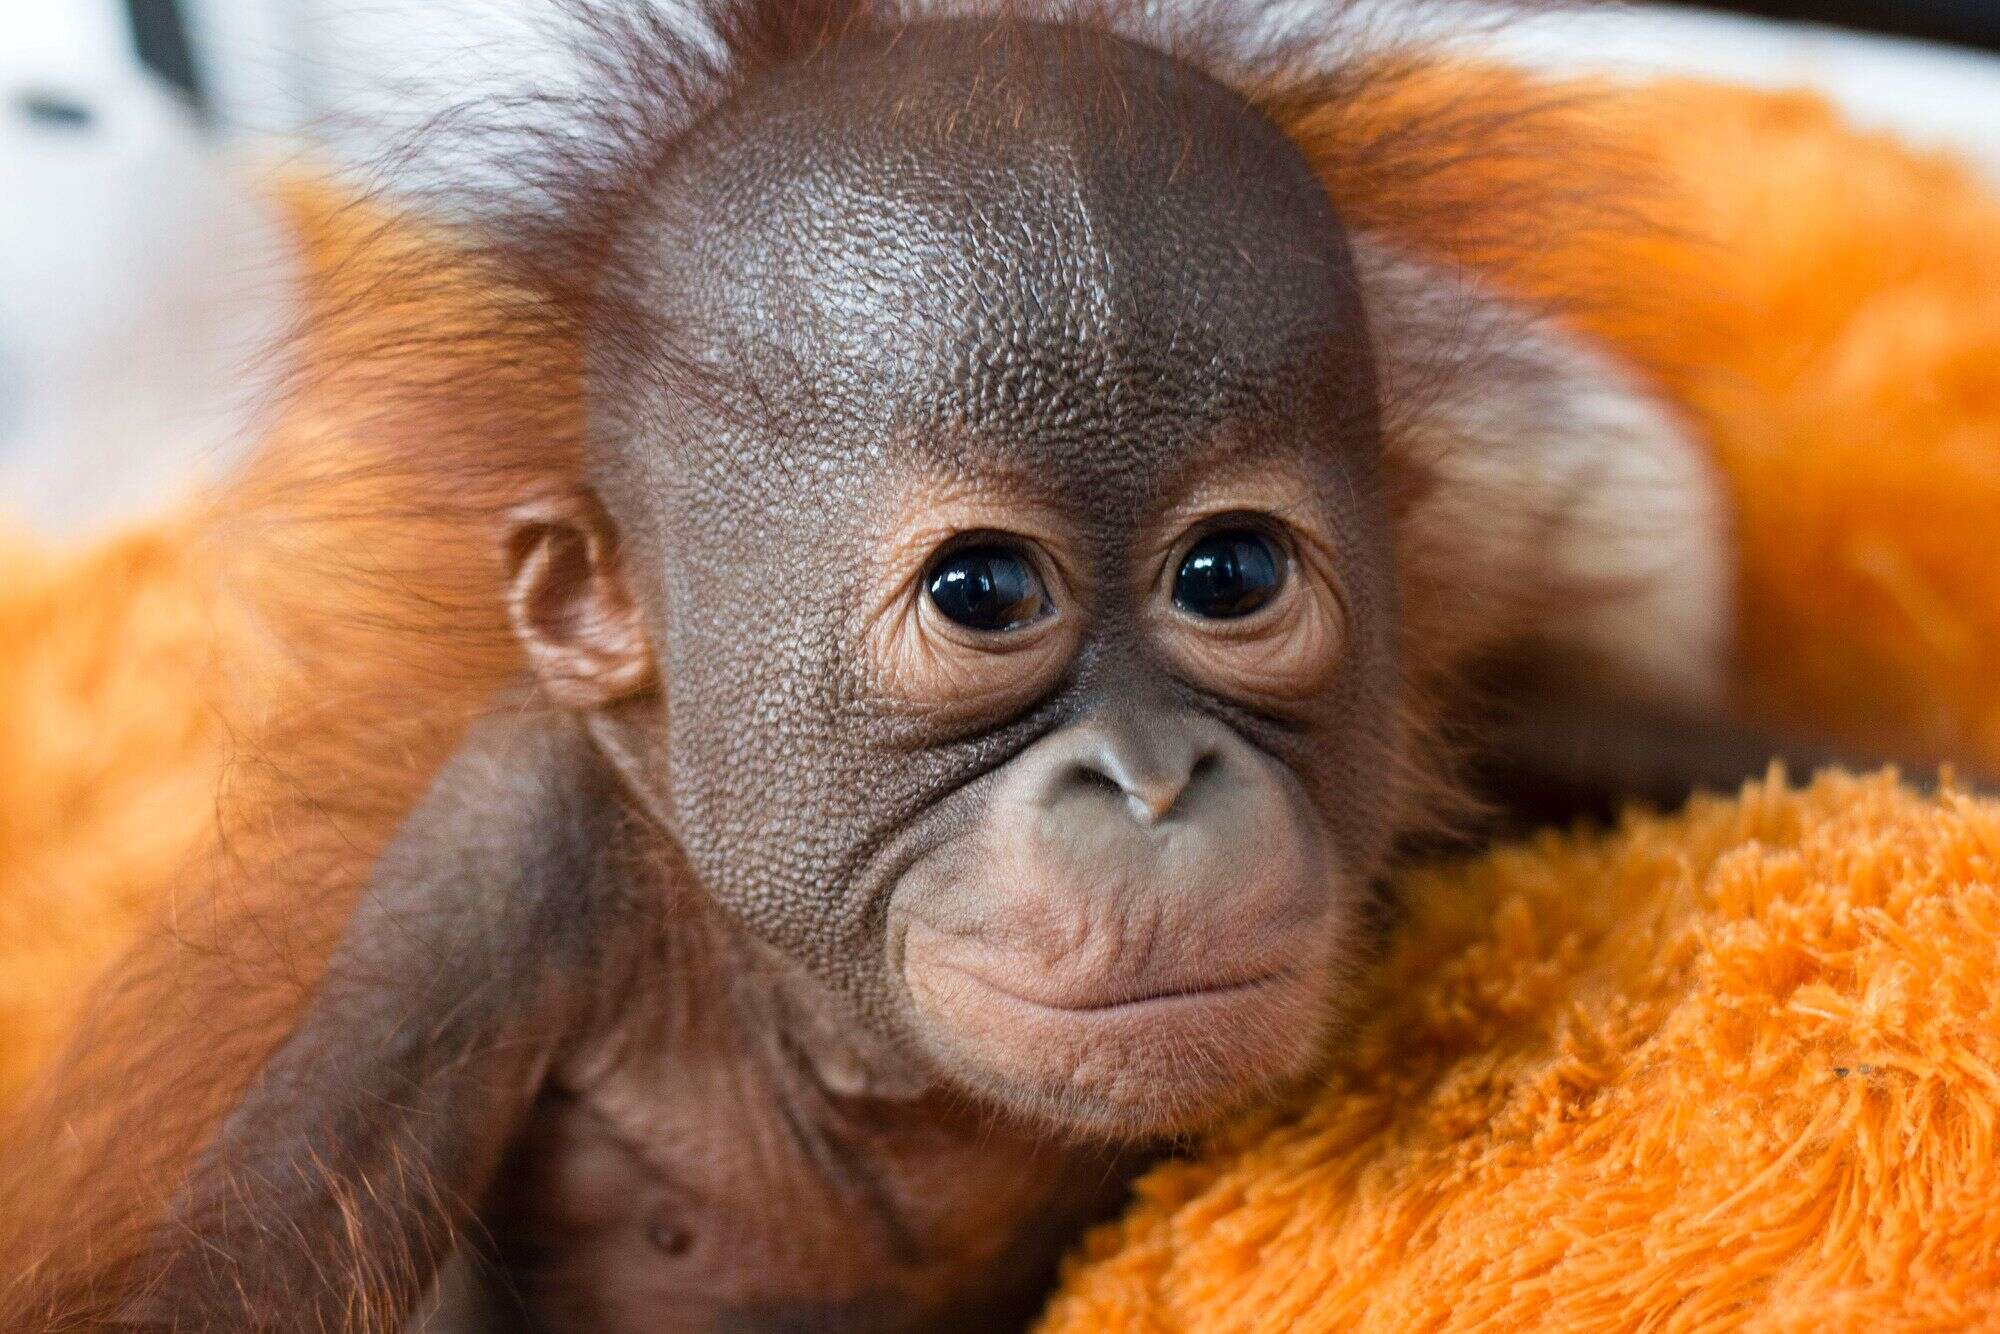 Gatot, a young orphan, receives medical care. Ninety-five percent of animals arriving at the International Animal Rescue's Indonesia center are orphaned orangutan babies.